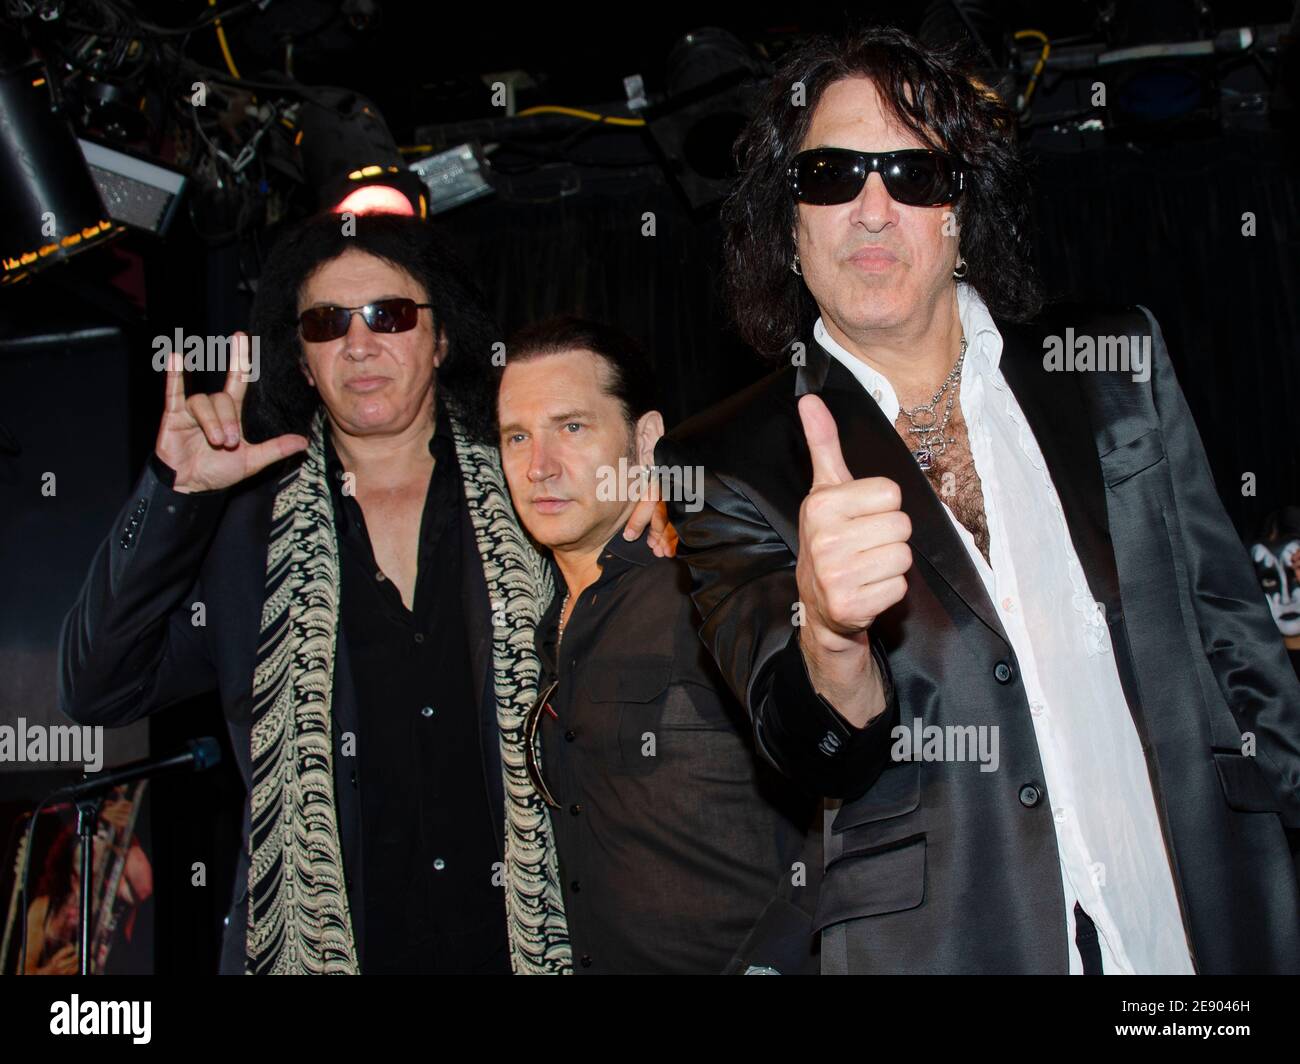 August 21, 2012: (L-R) Gene Simmons, Eric Singer and Paul Stanley of the Rock Band KISS attend the launch of the KISS Monster Book. (Credit Image: © Billy Bennight/ZUMA Wire) Stock Photo